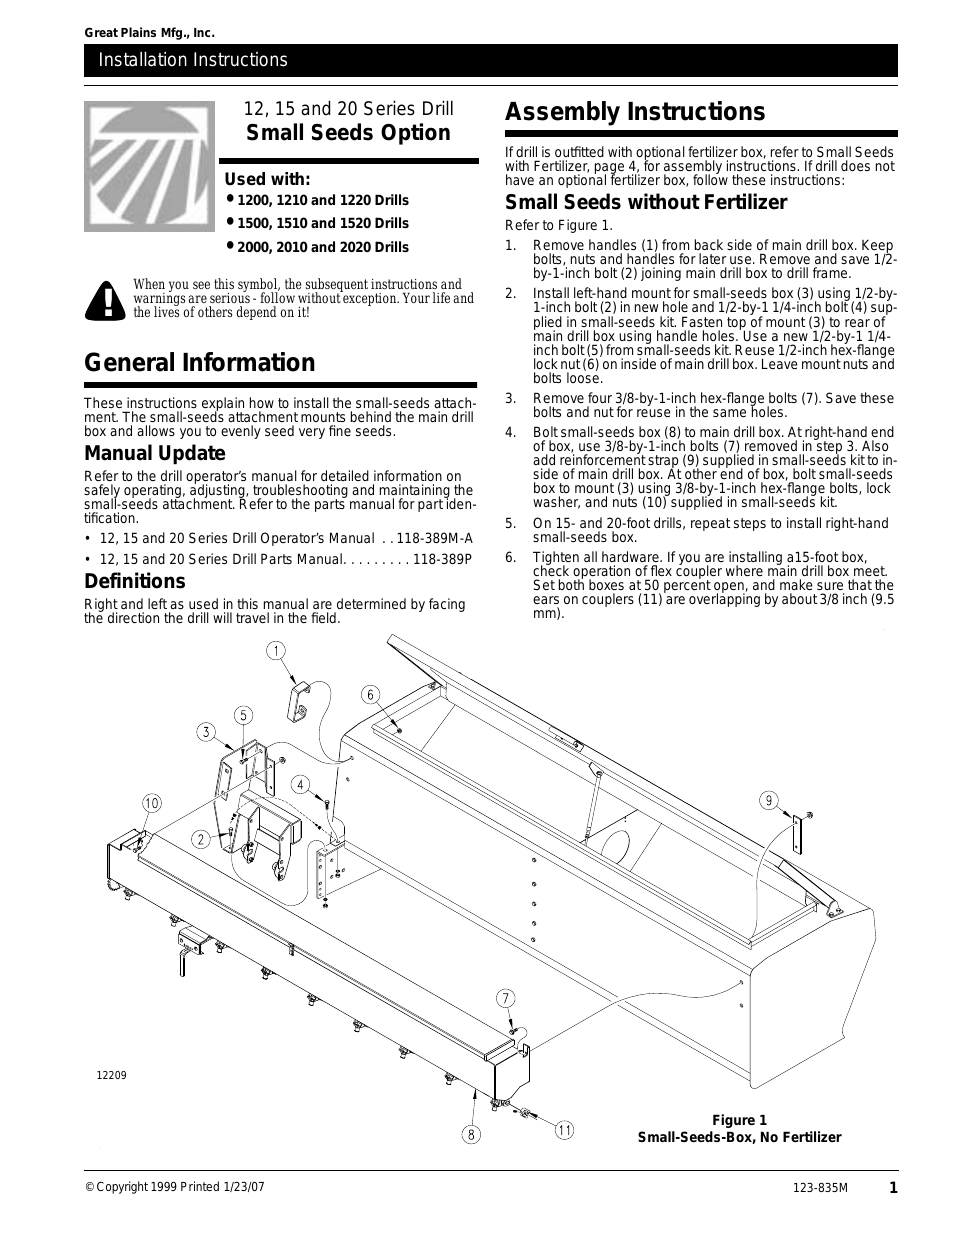 15 Series Drill Assembly Instructions